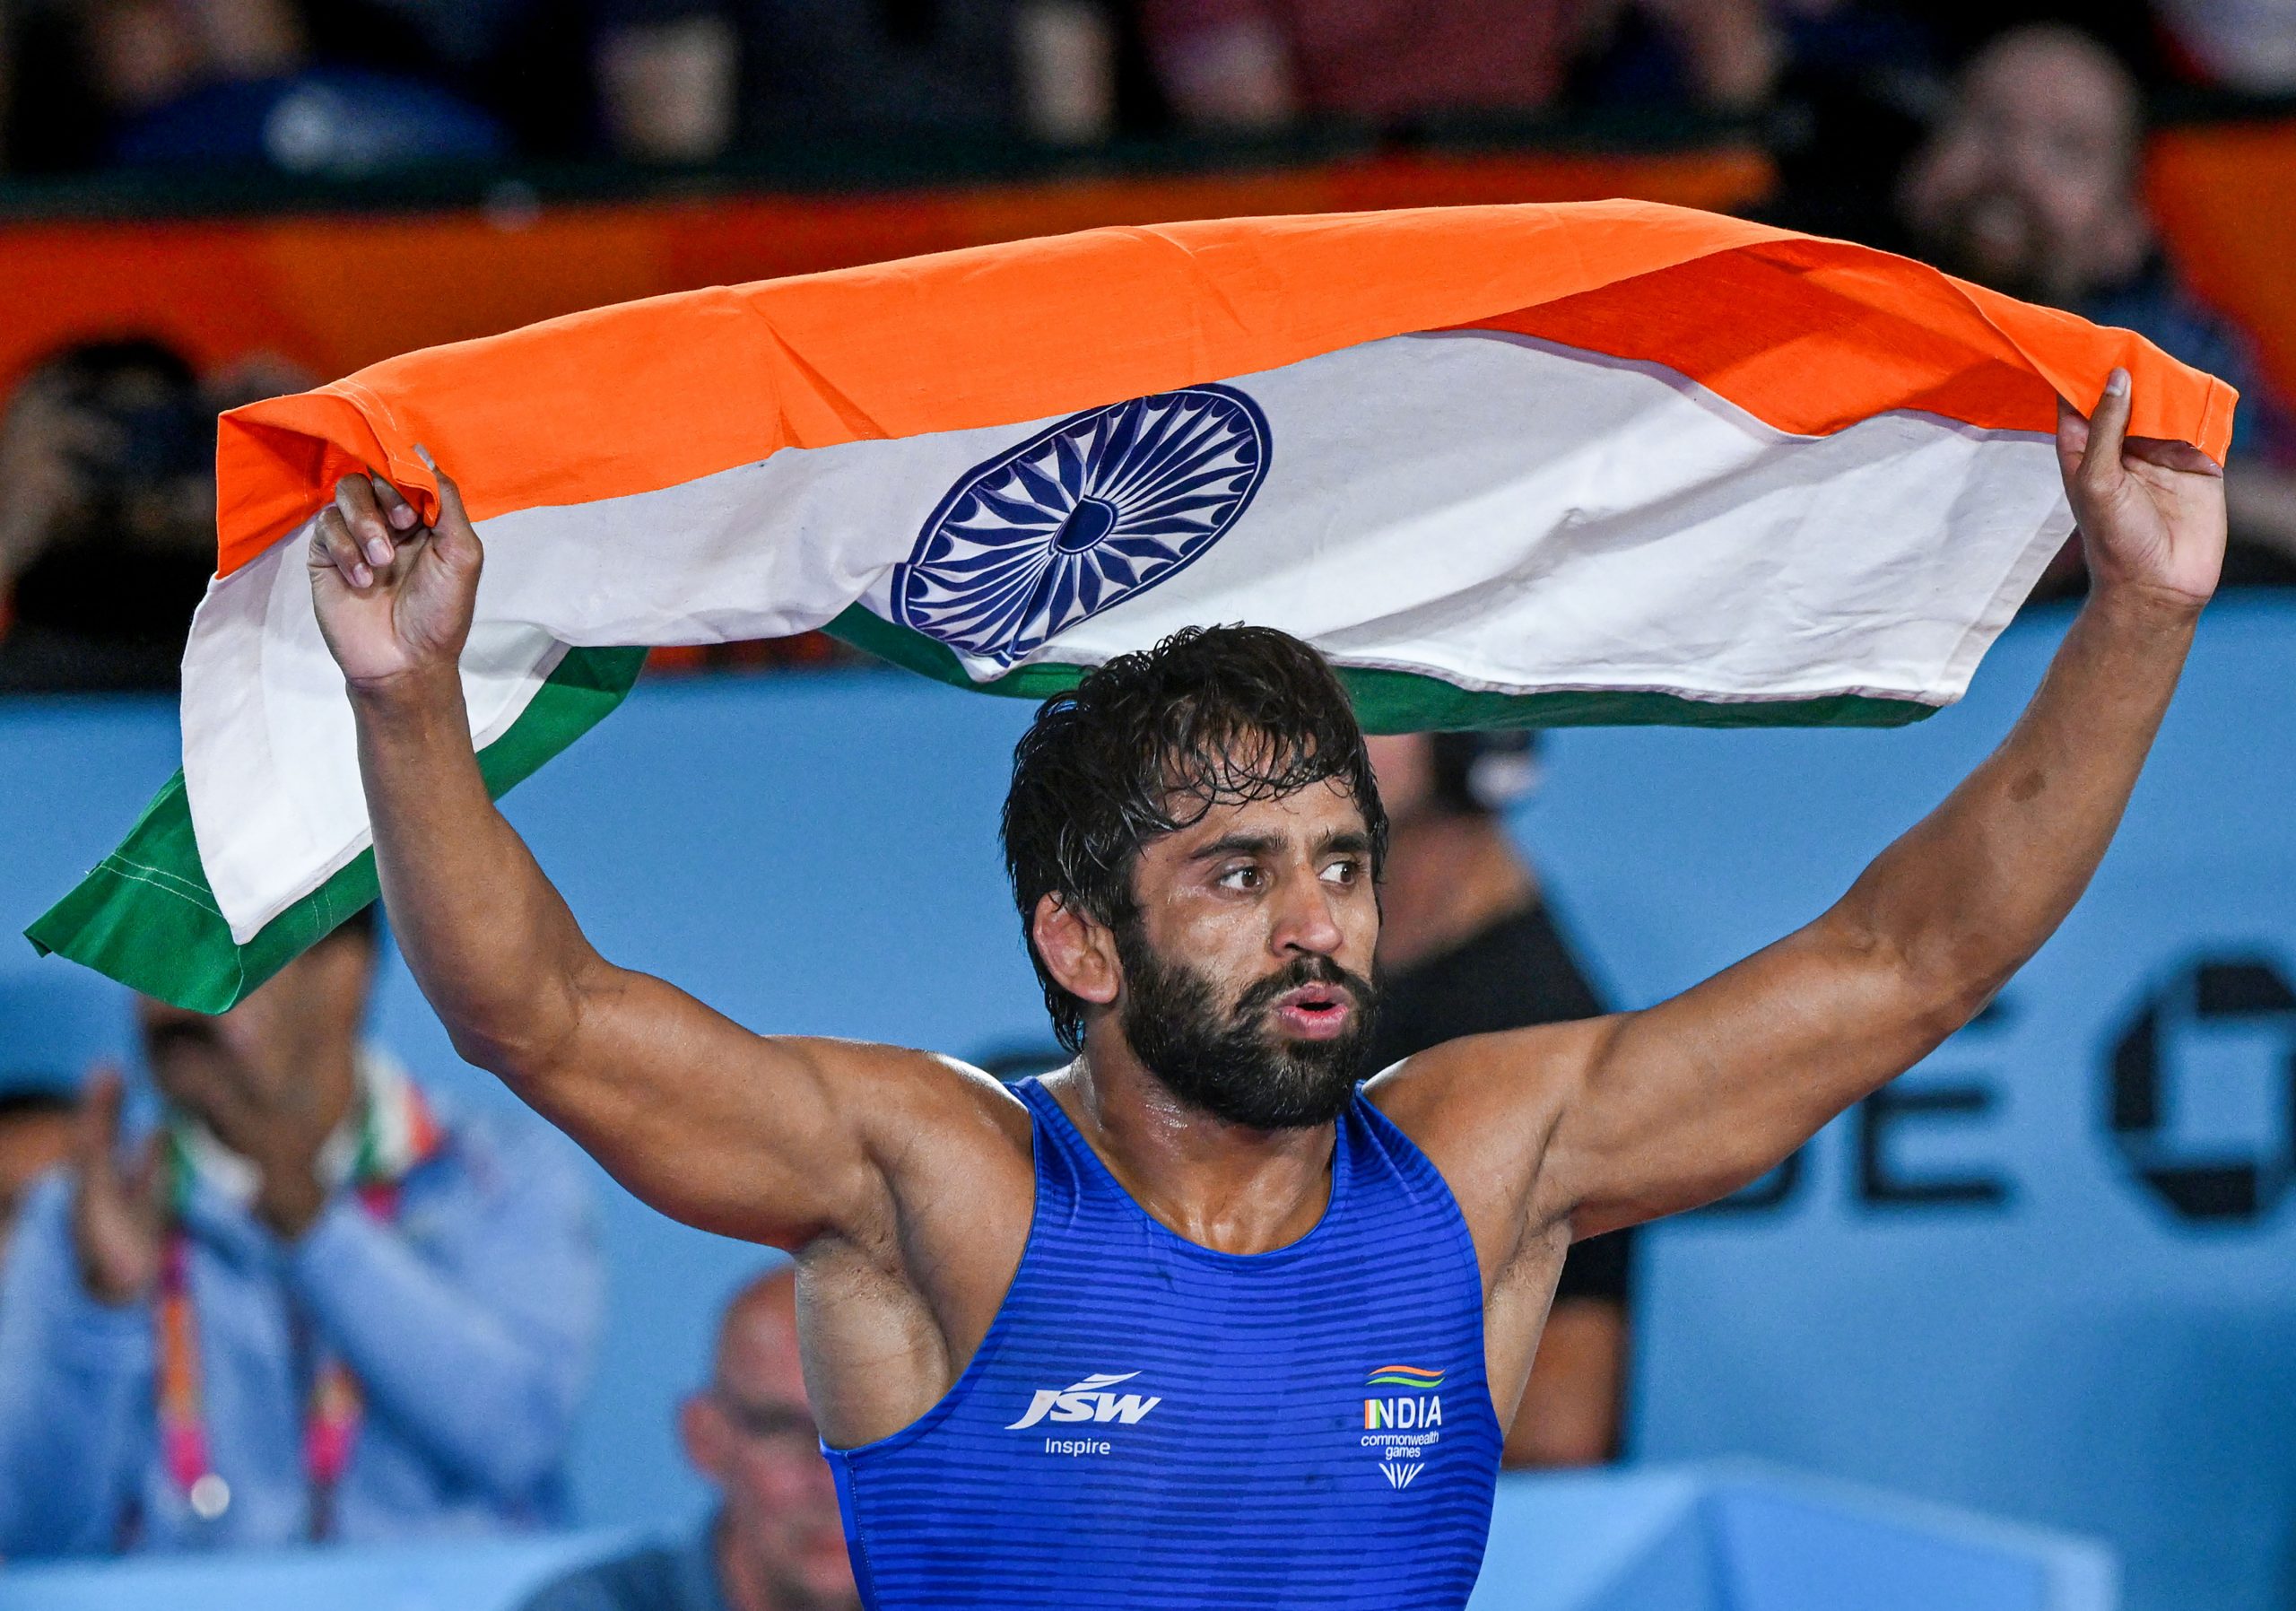 Watch: Bajrang Punia claims Indias first wrestling gold medal at CWG 2022